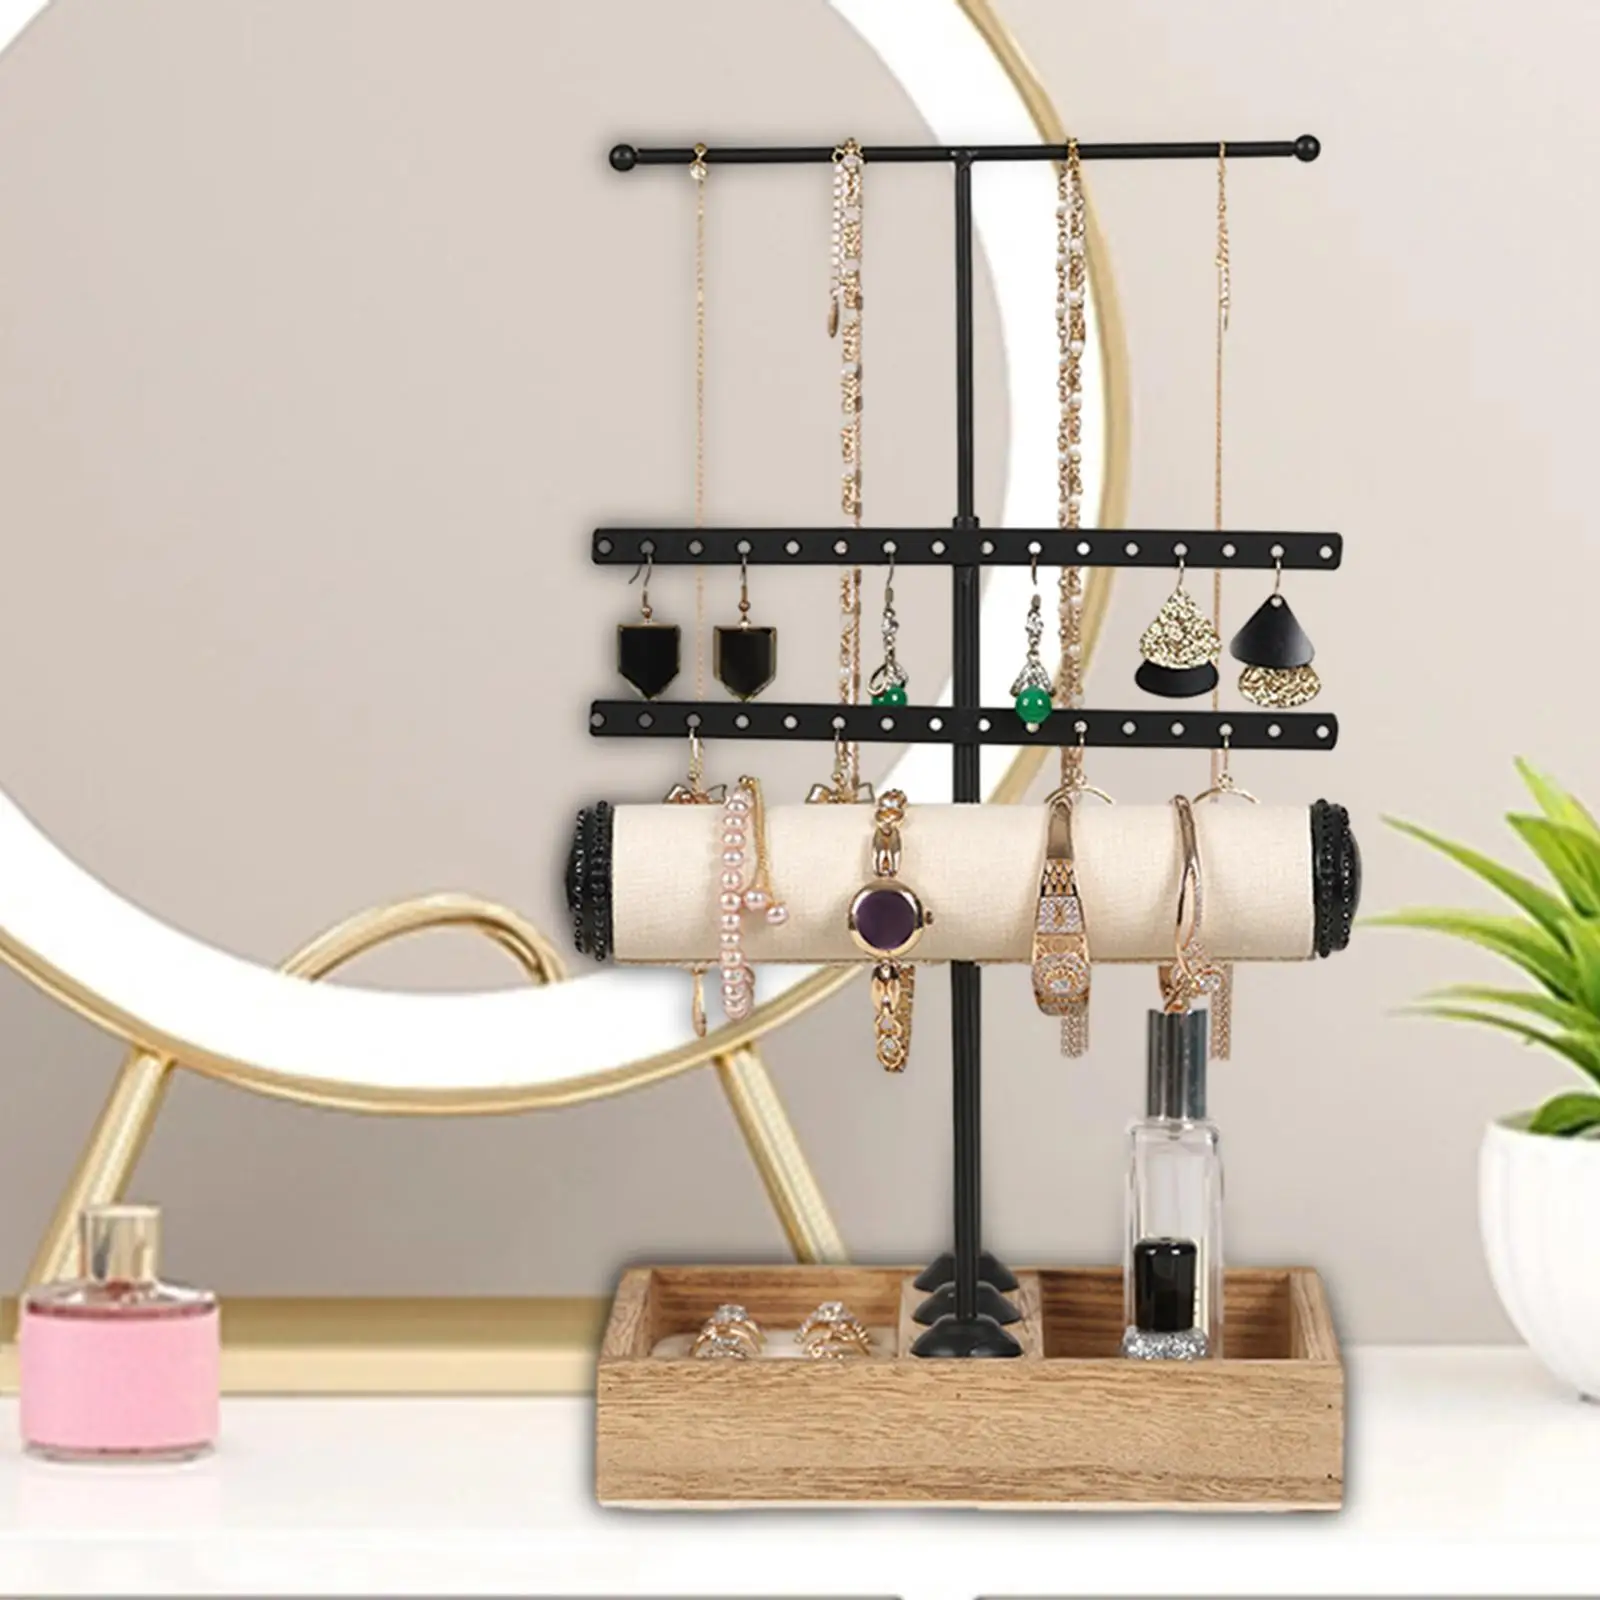 4 Tiers Jewelry Display Rack Jewelry Stand T Shaped Necklace Rack Holder Wooden Base Jewelry Organizer for Earrings Rings